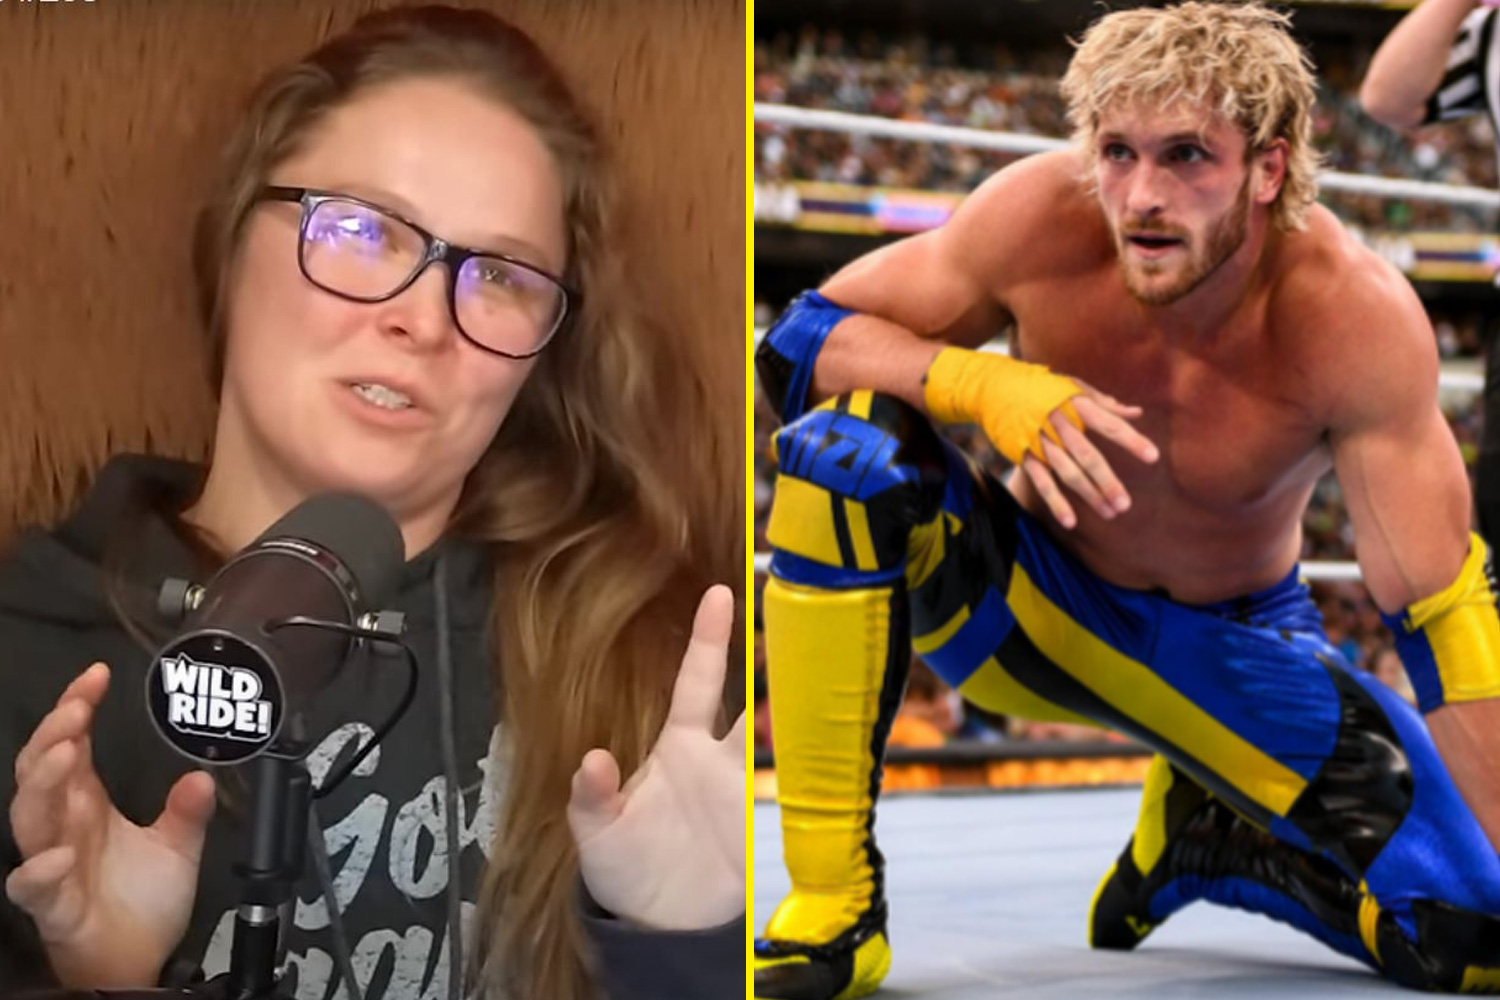 'It blows my mind' - Ronda Rousey in fresh swipe at WWE over use of Logan Paul